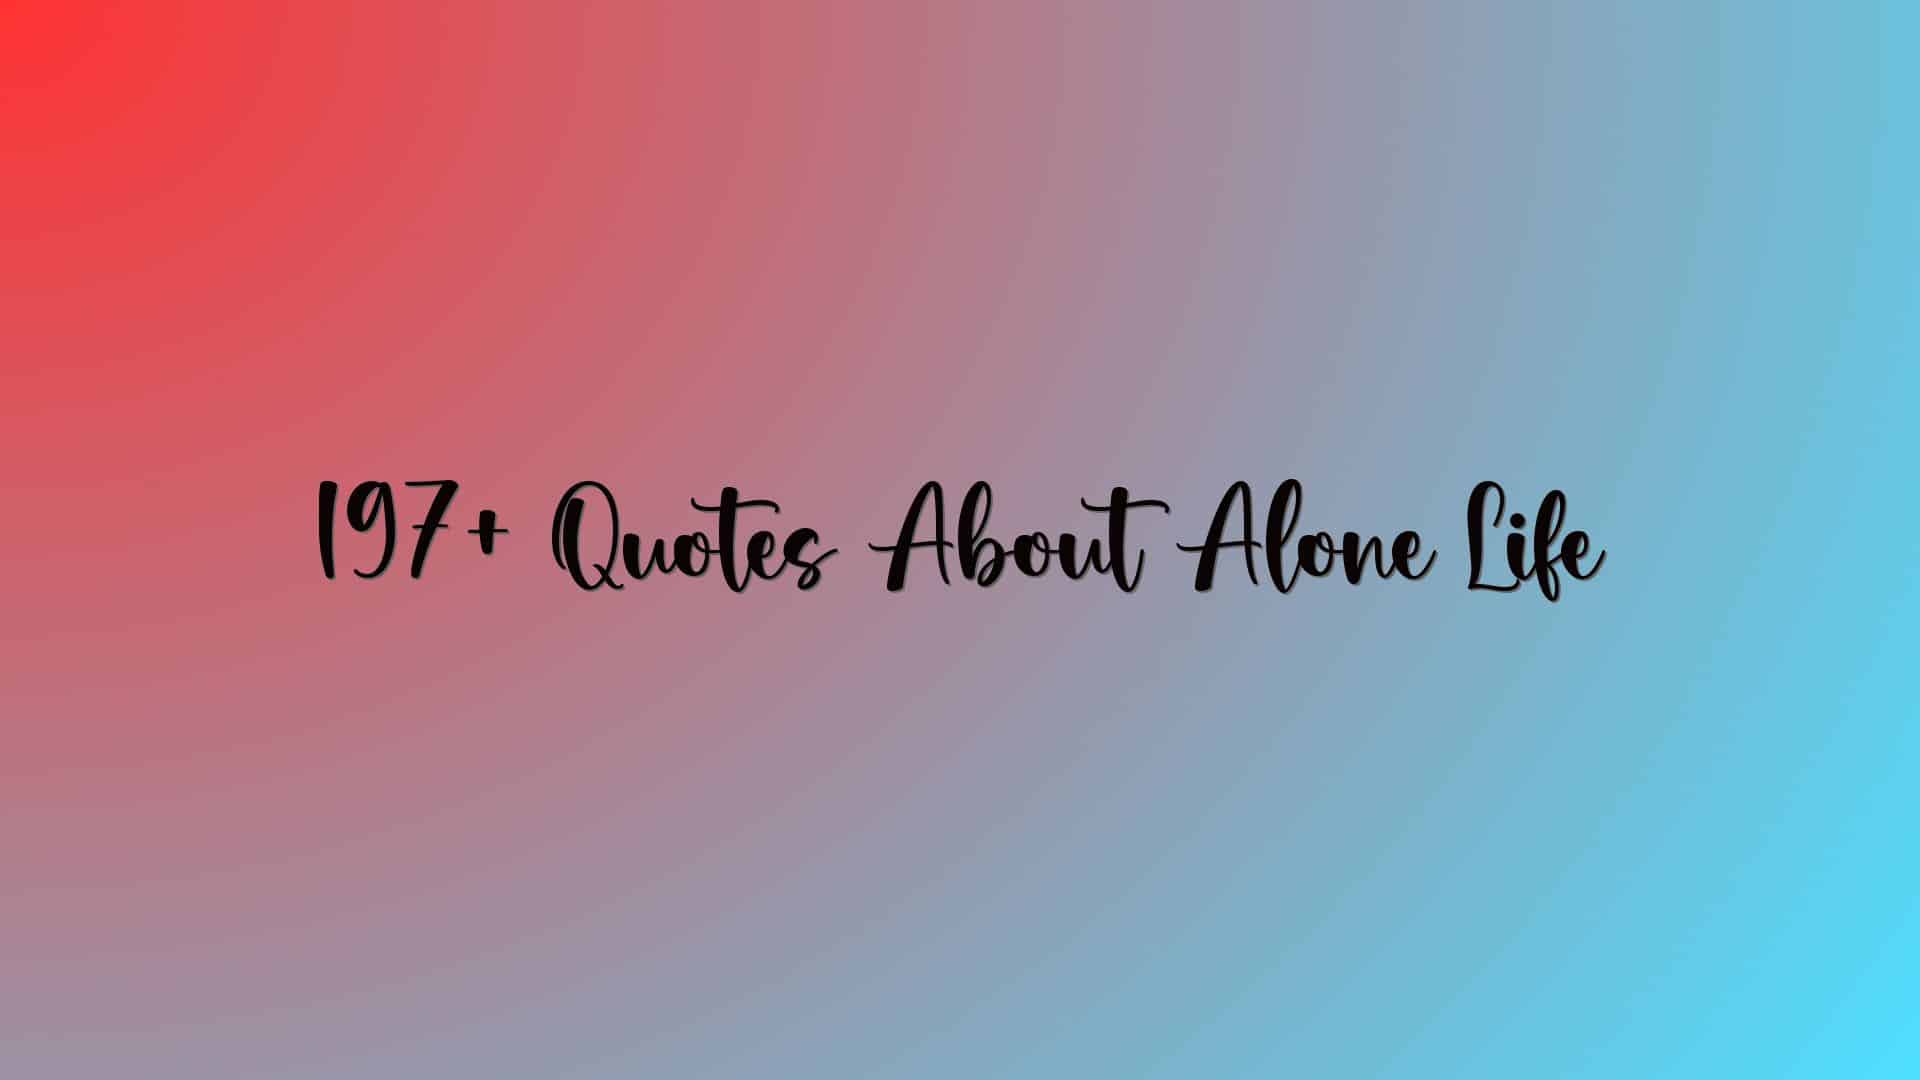 197+ Quotes About Alone Life